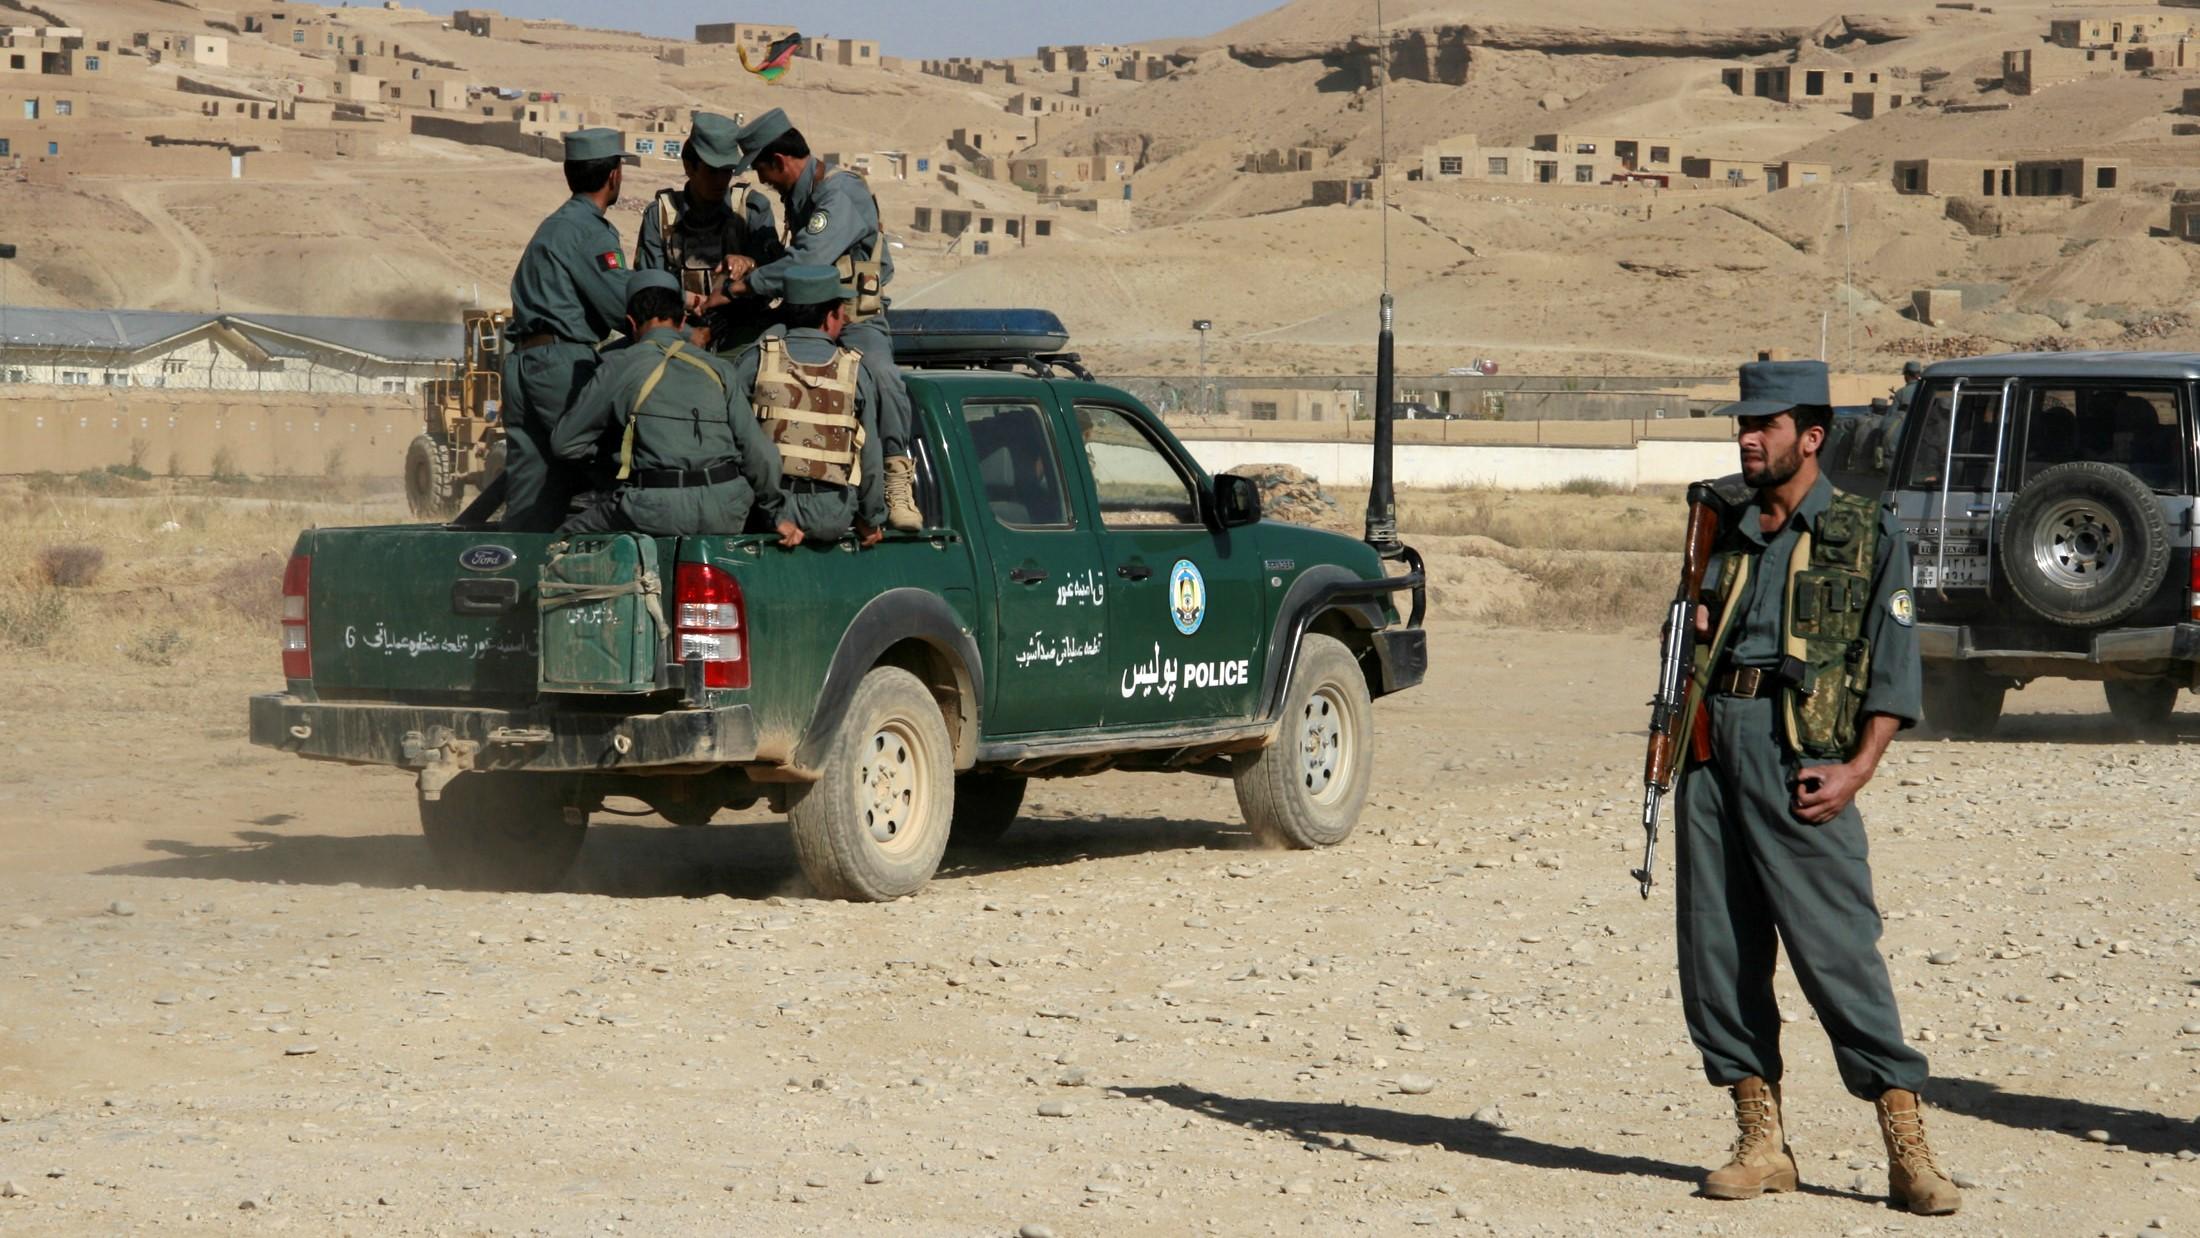 Photo shows a group of uniformed officers huddled in the back of a dark green pickup truck with "Police" written on the side. They are stationed in front of a village on a hill with several low-lying structures that appear to be built out of natural materials. One officer stands at attention away from the truck.